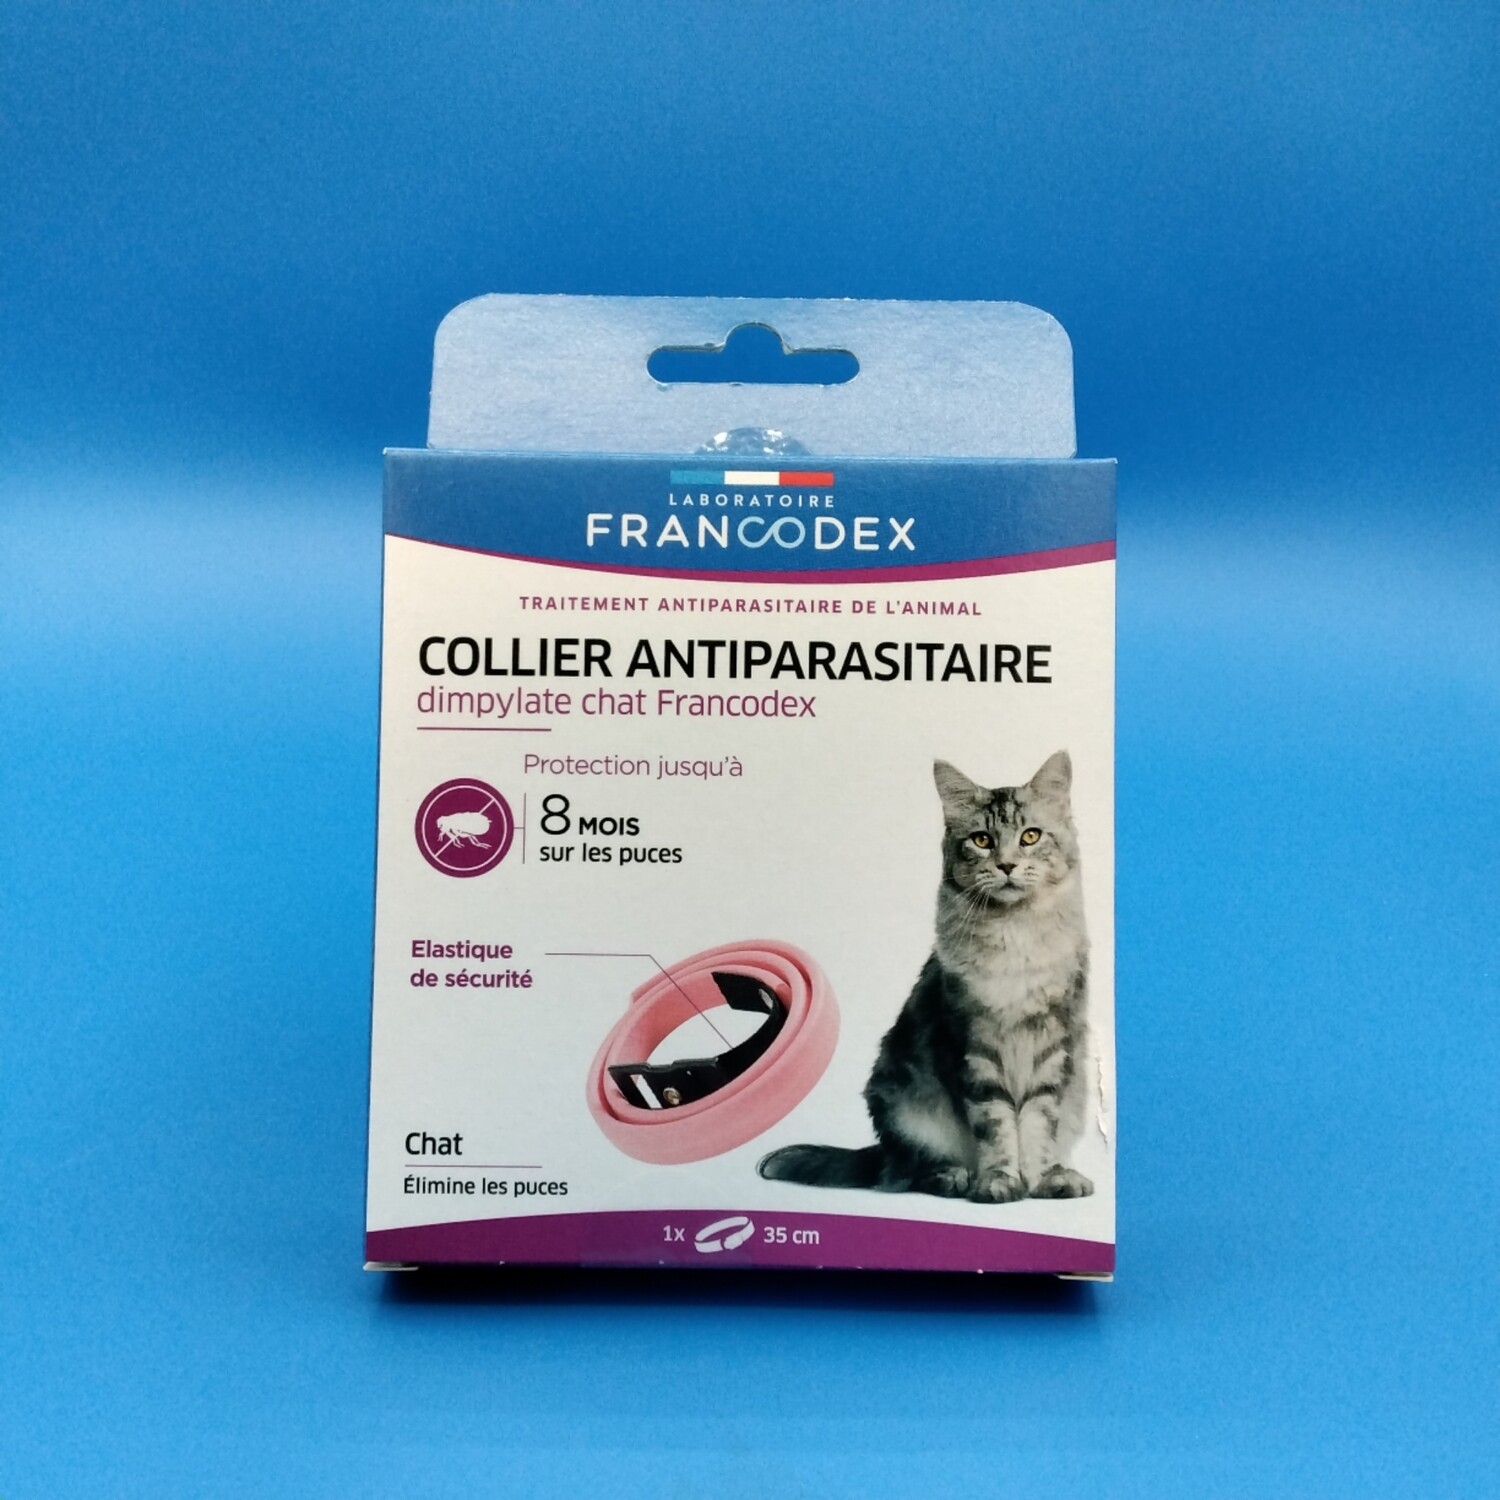 Collier antiparasitaire